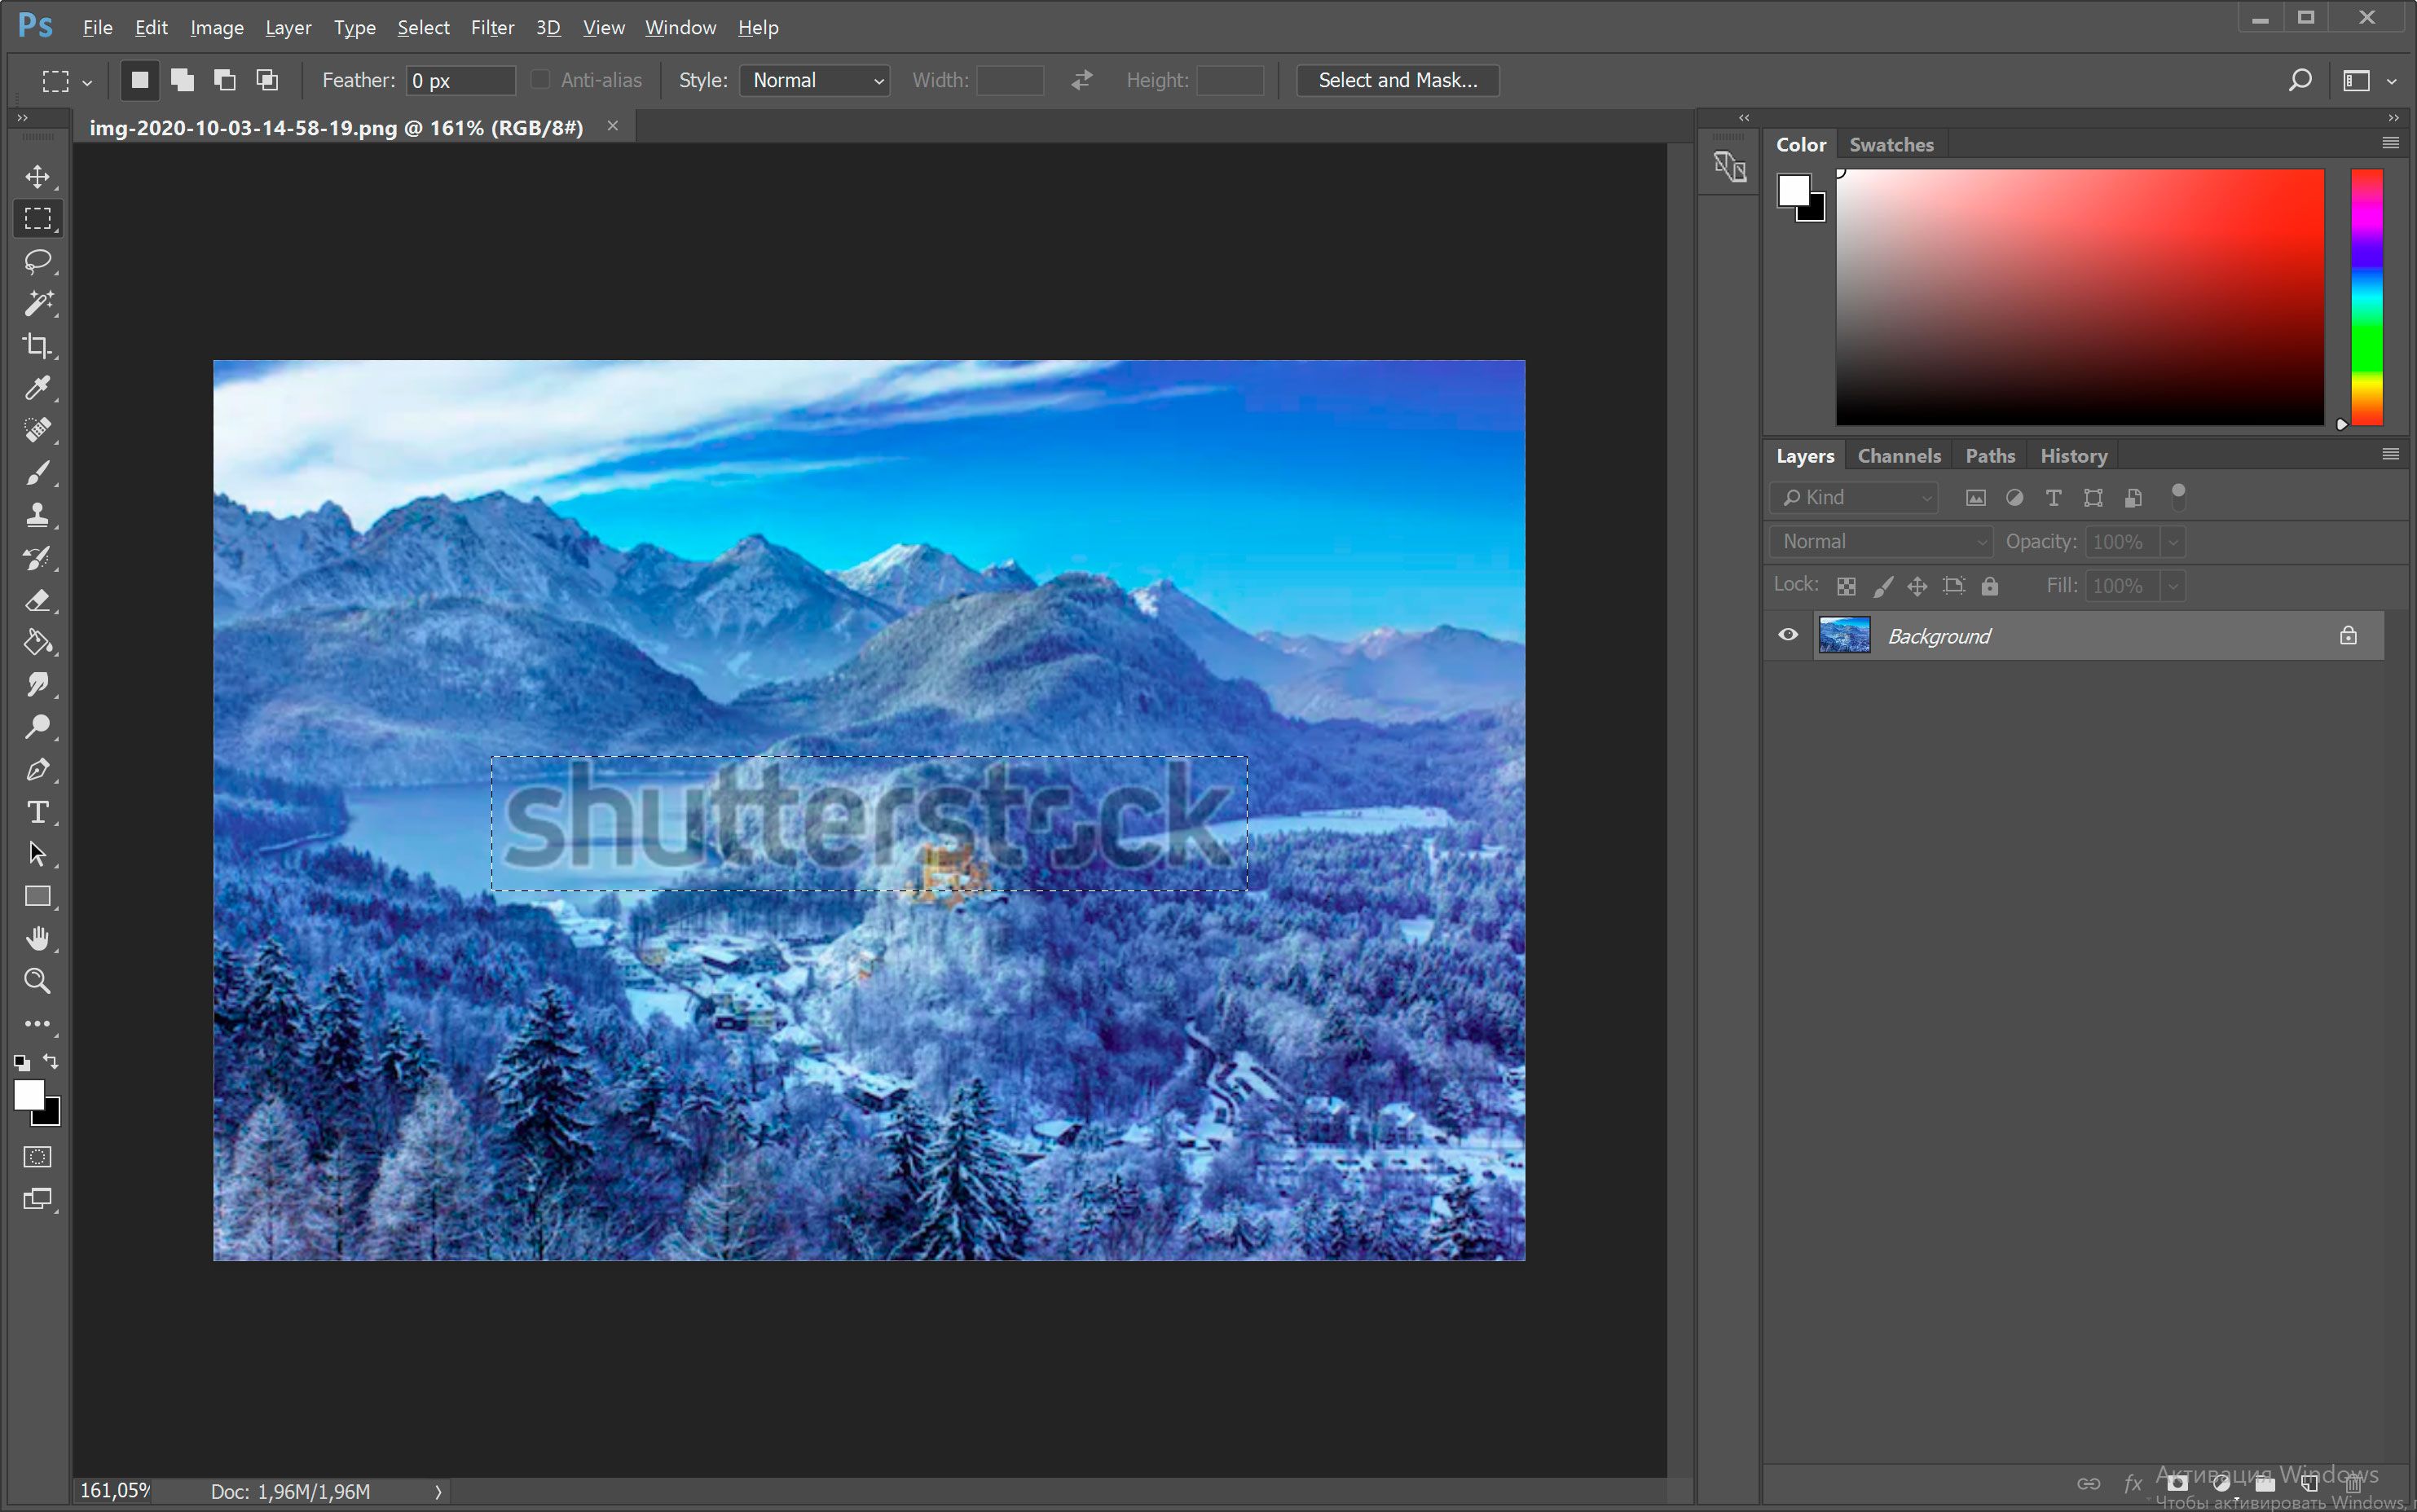 Open image with shutterstock watermark in photoshop..